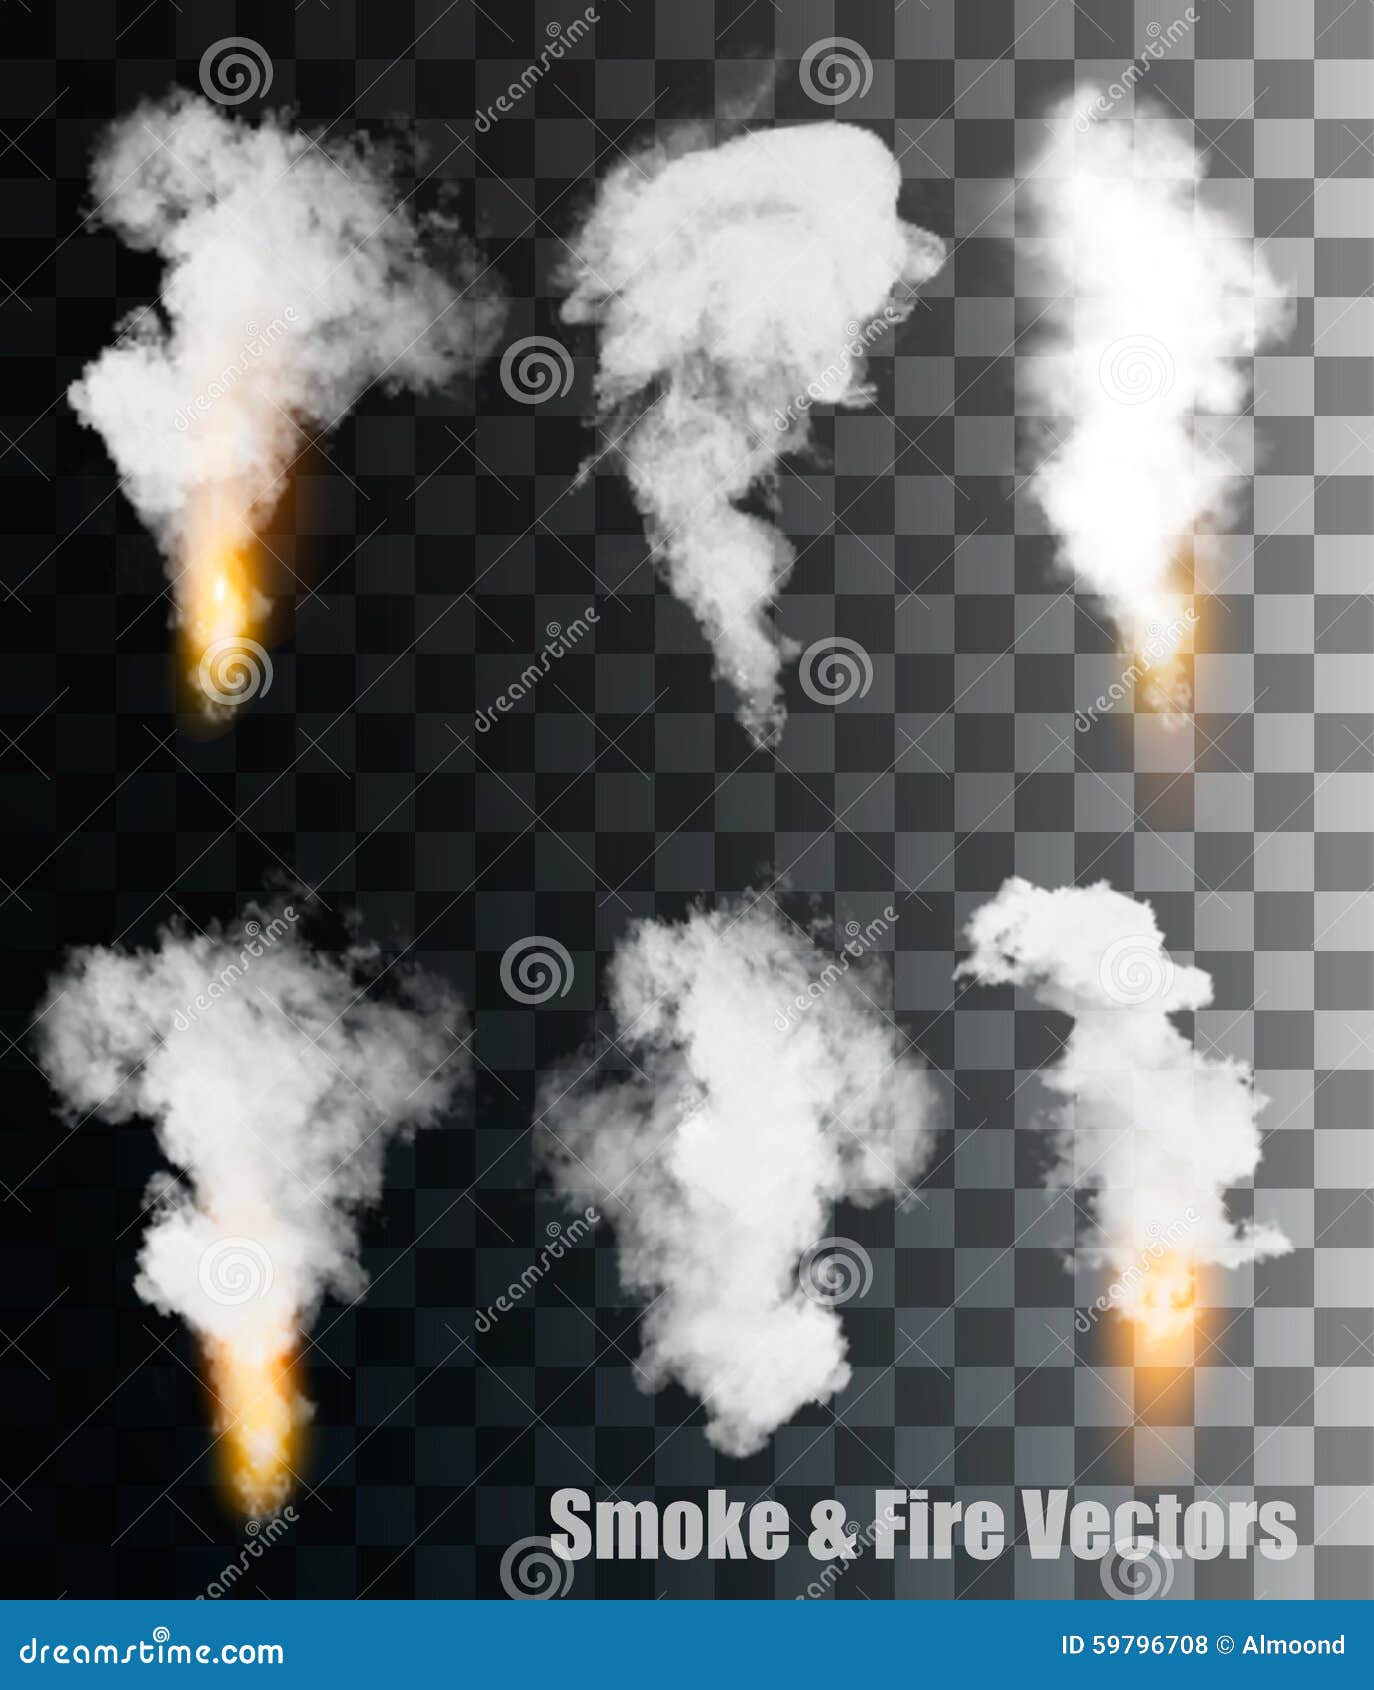 smoke and fire s on transparent background.